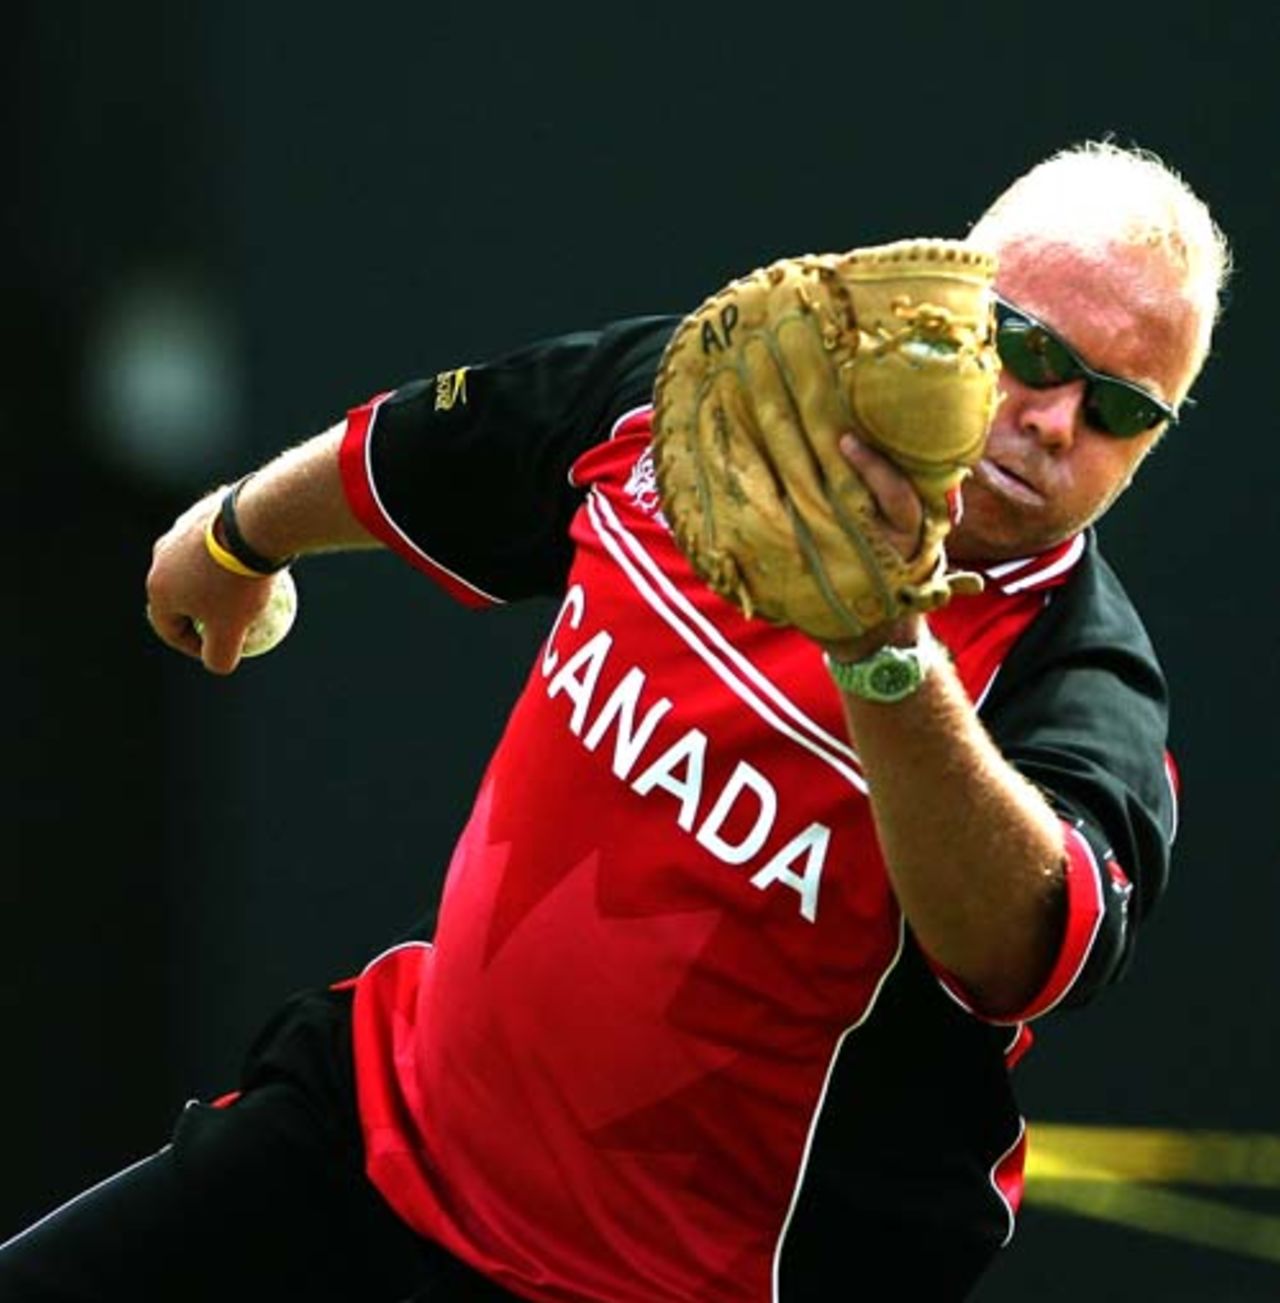 Andy Pick, the Canada coach, dishes out the fielding practise